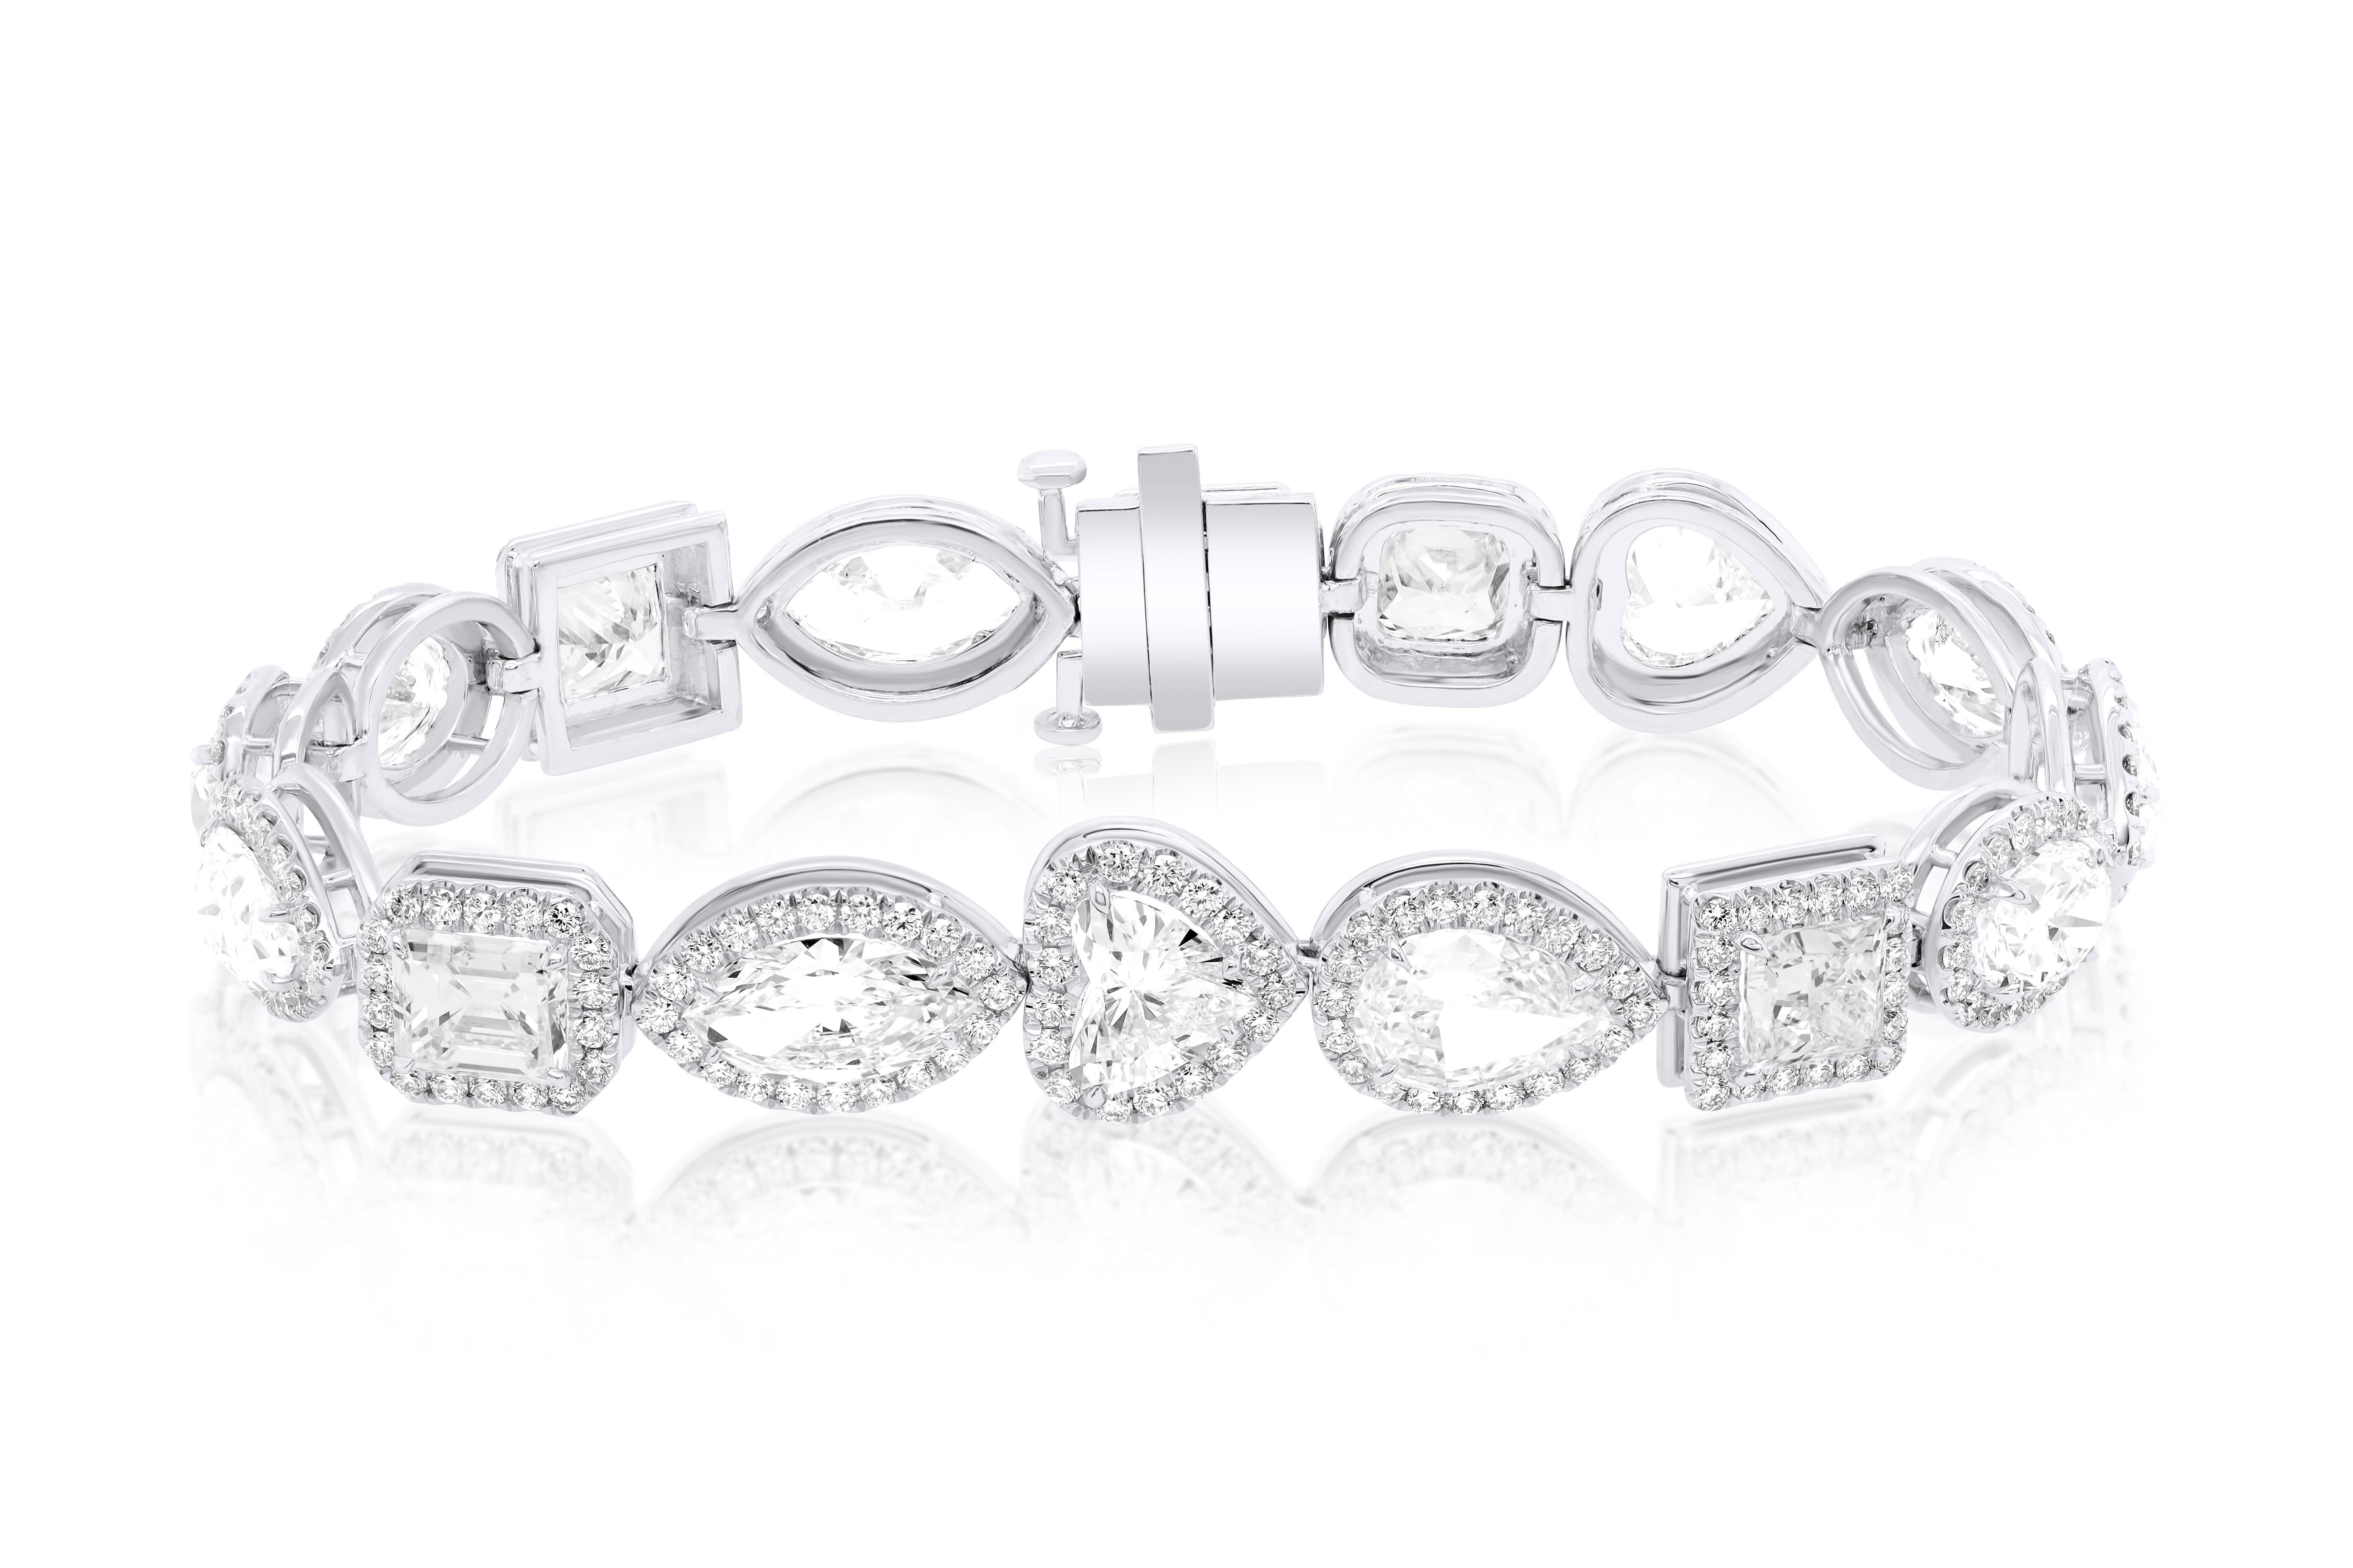 One-of-a-kind Diamond Bracelet features 16.20 carat multi shape diamond tennis bracelet features 16.20 Carats of GIA Certified Diamonds 
D-G in Color VVS-VS in Clarity each diamond certified by GIA. Surrounded by 3.00 Carats of diamonds 

